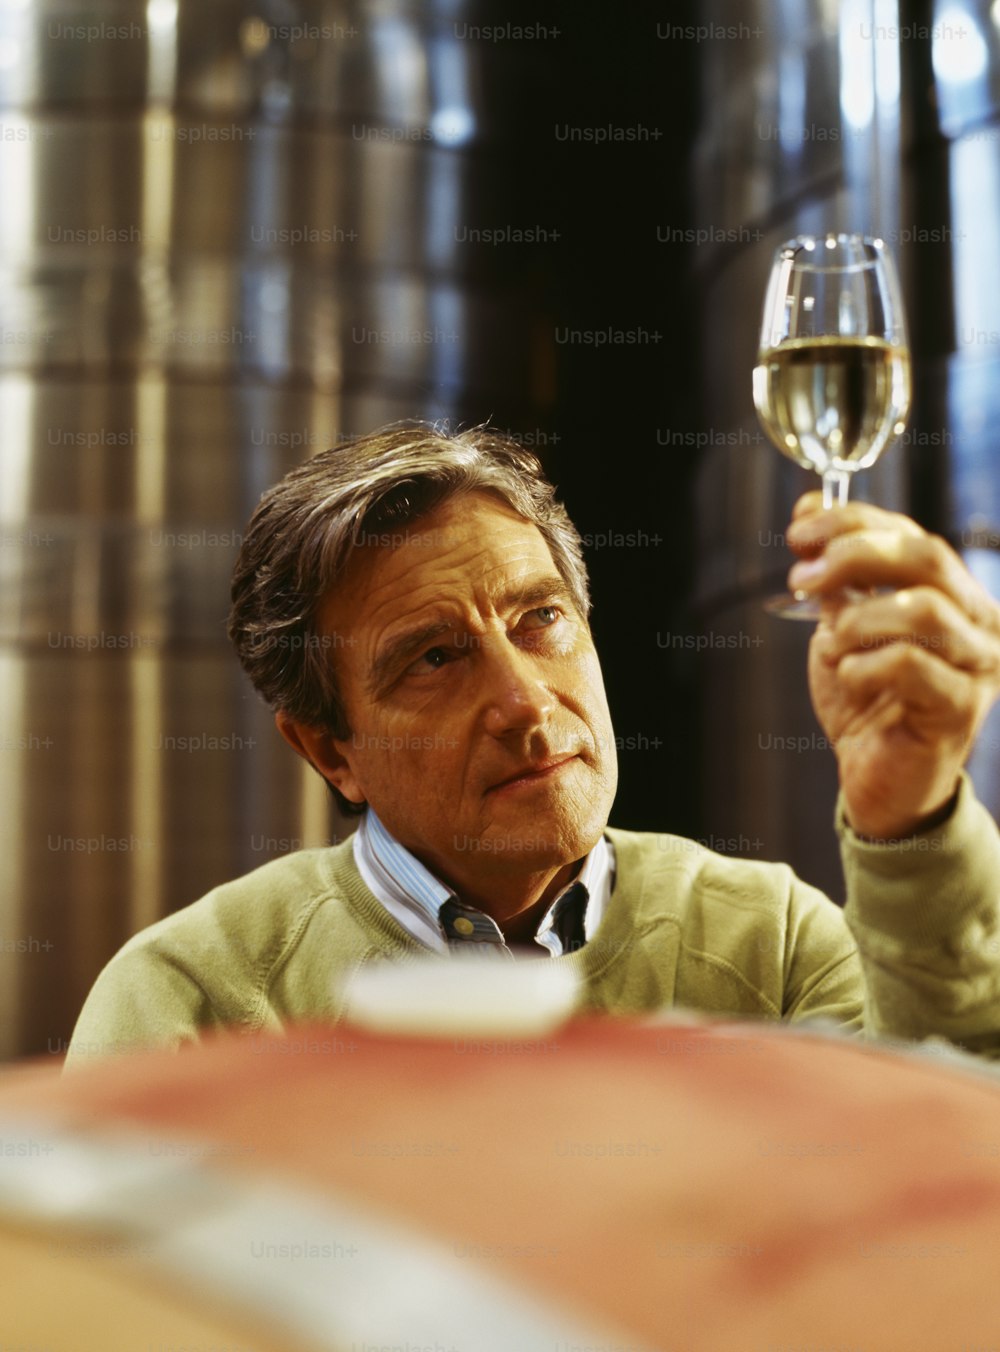 a man holding a glass of wine in his hand